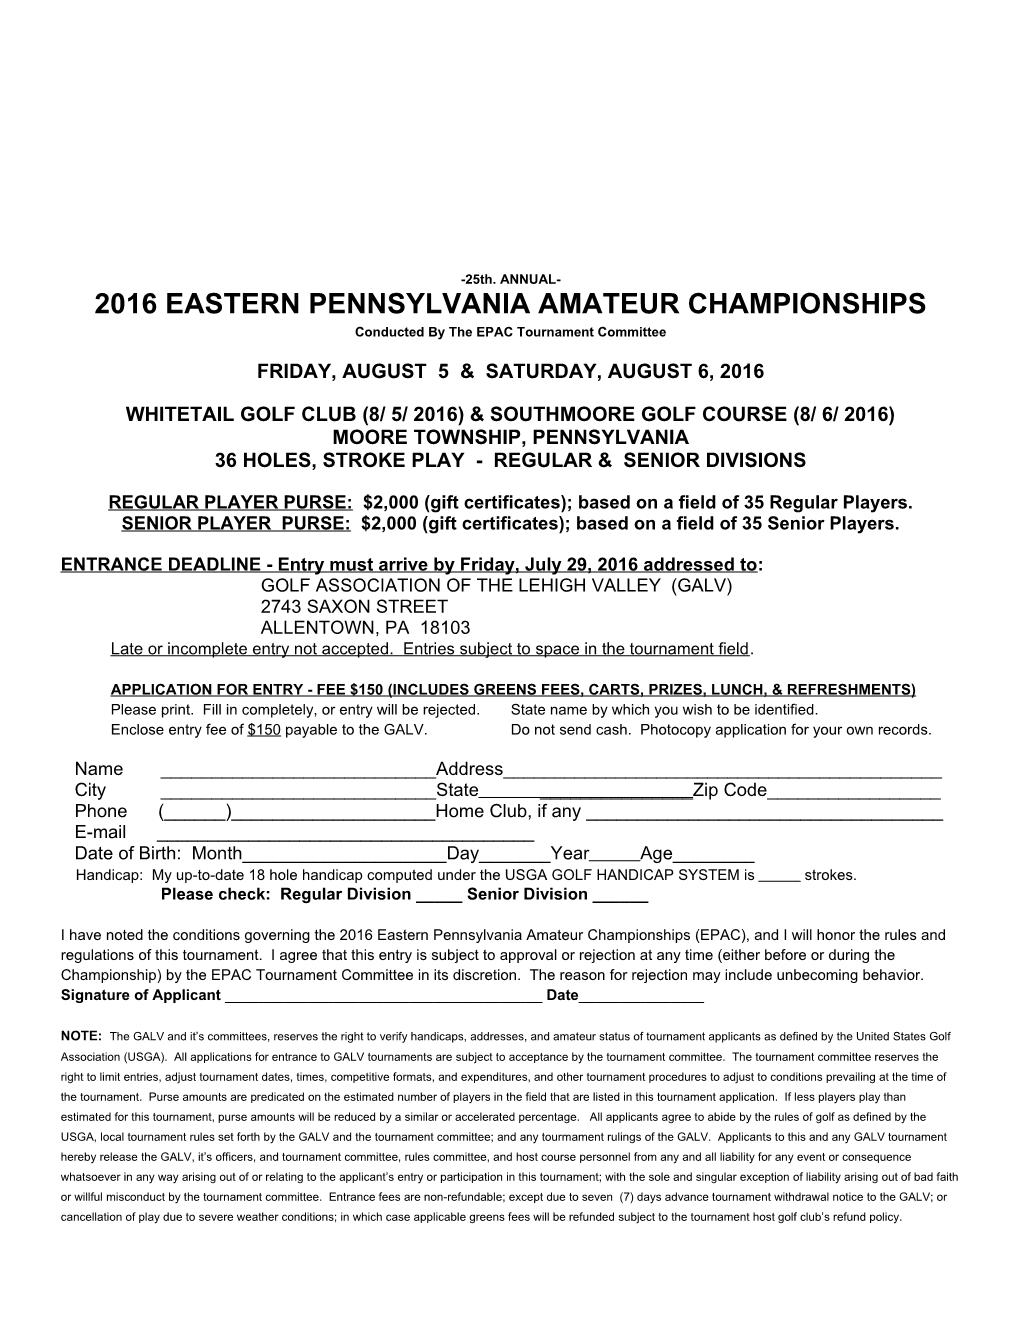 2016 EASTERN PENNSYLVANIA AMATEUR Championshipsconducted by the EPAC Tournament Committee